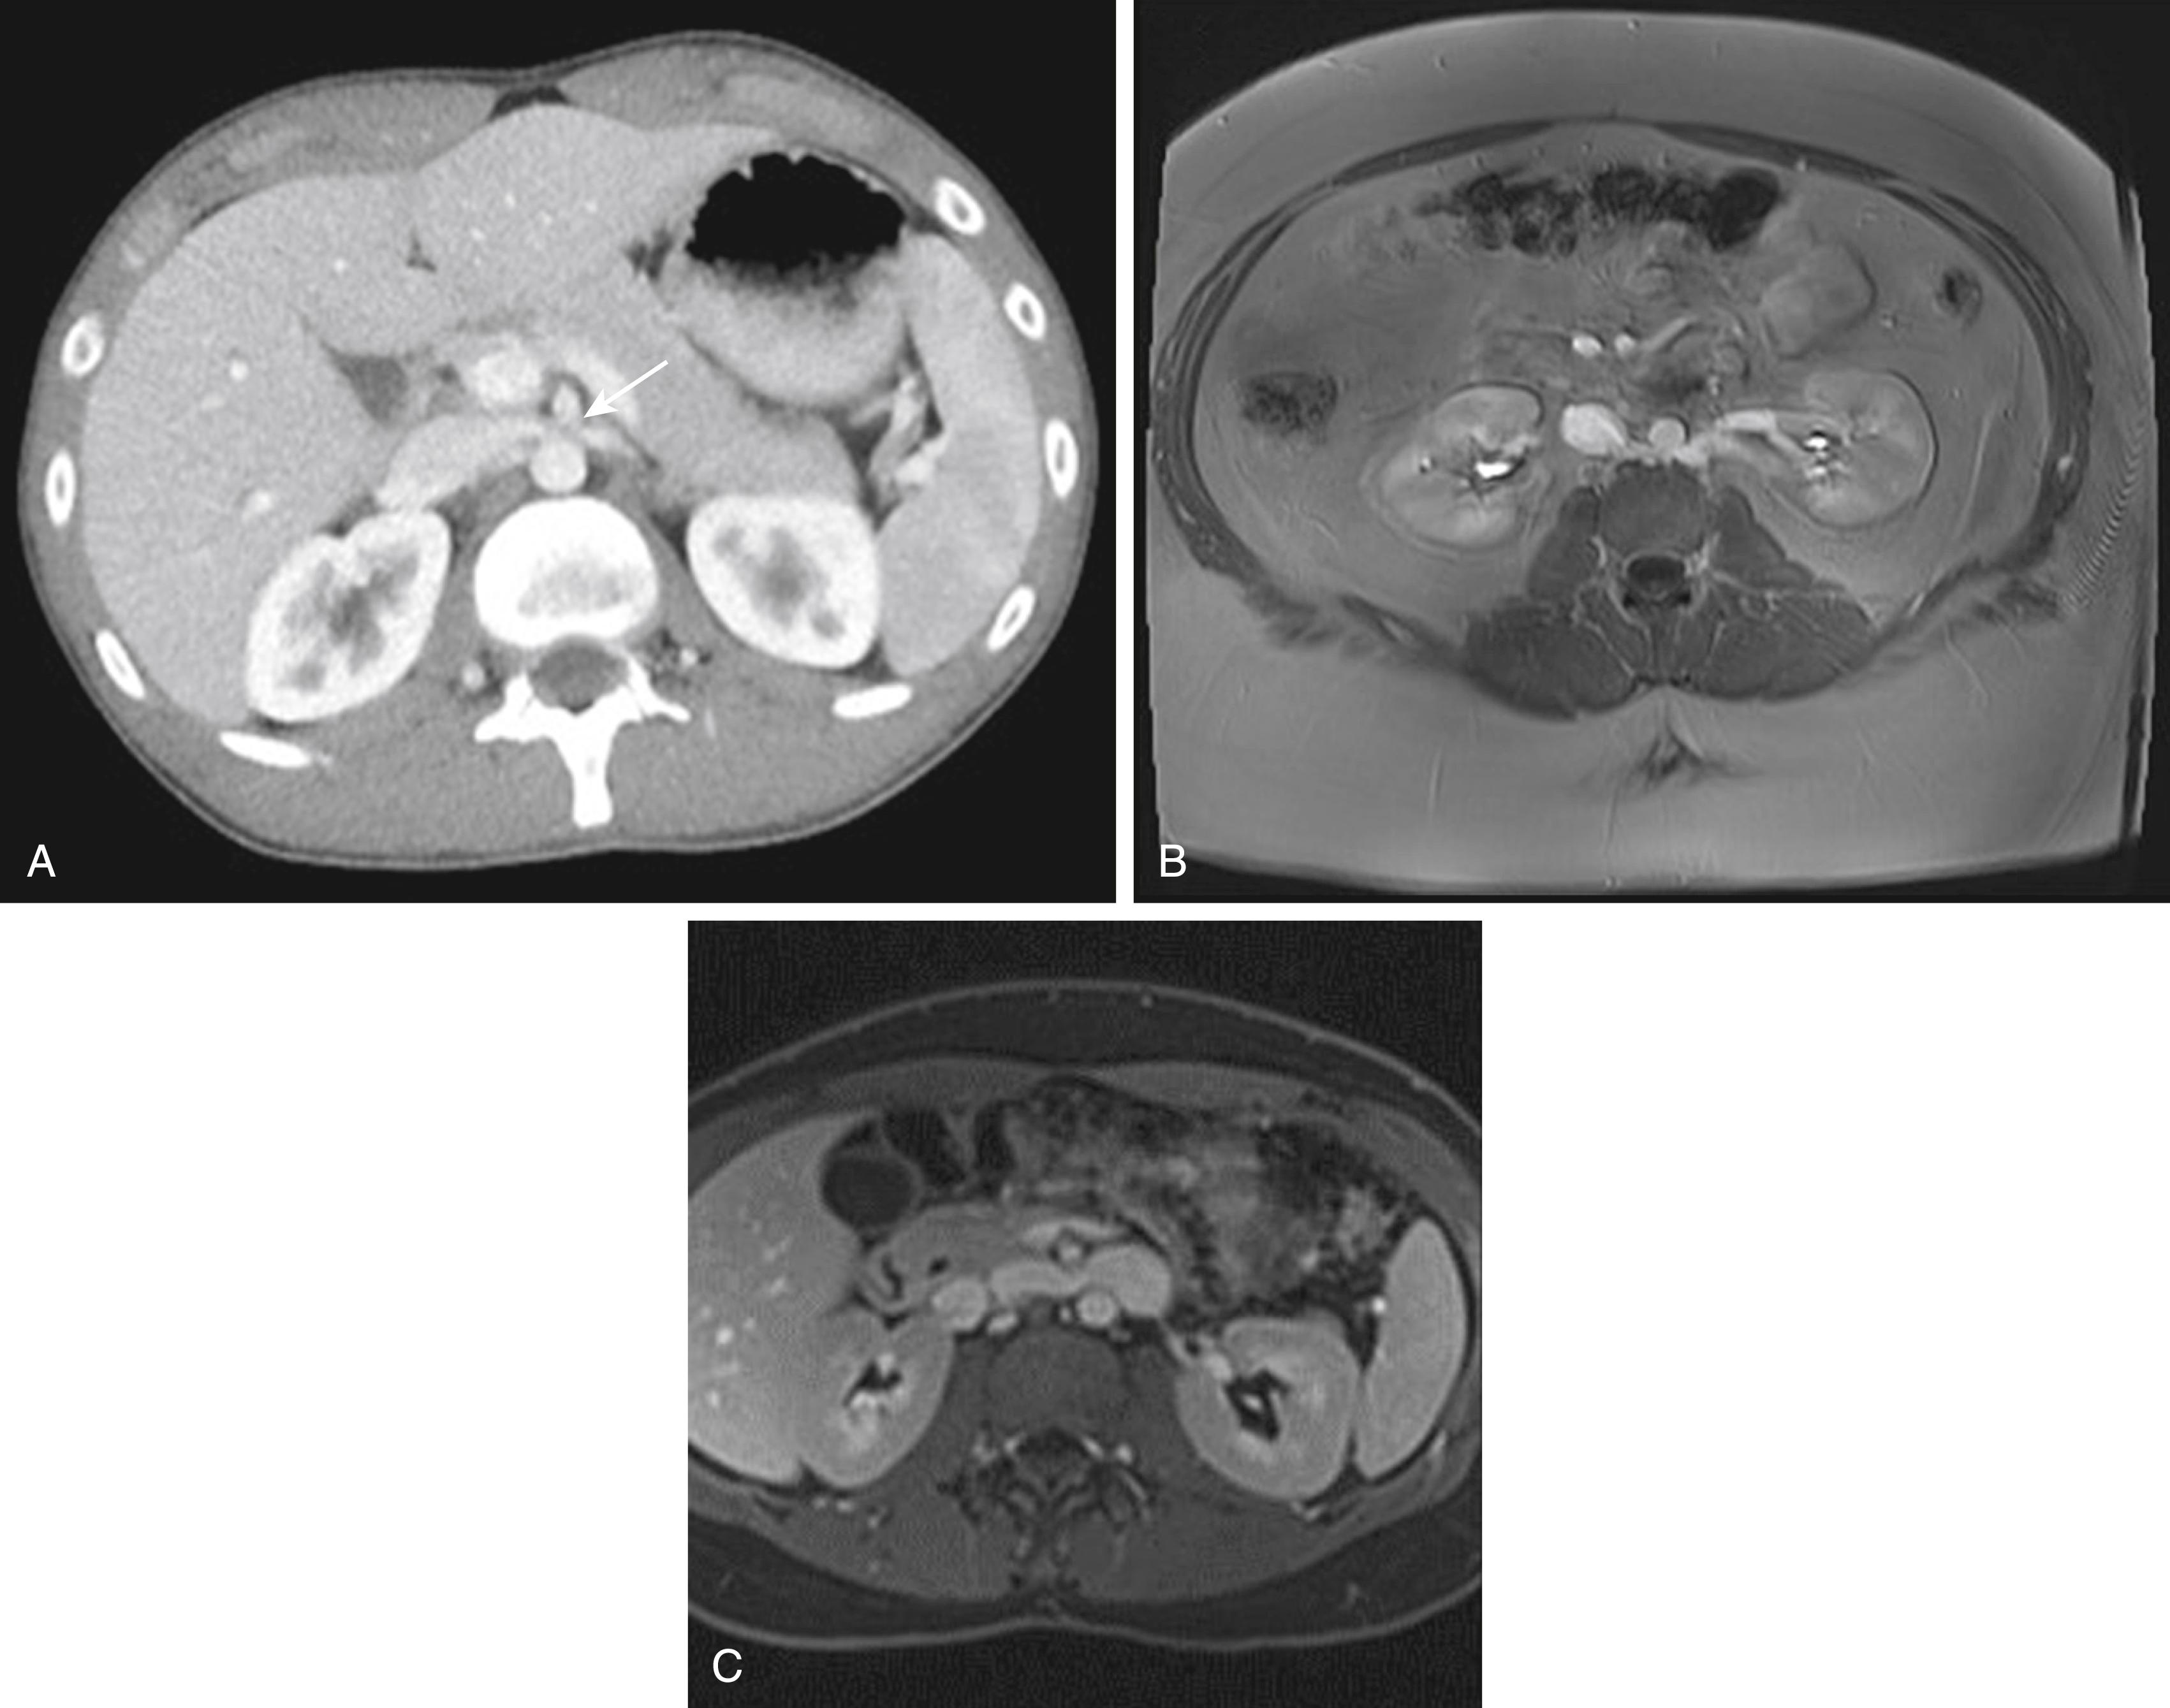 Figure 165.1, Cross-sectional imaging demonstrating ( A ) anterior nutcracker syndrome with compression of the left renal vein (arrow) between the aorta and superior mesenteric artery as observed by computed tomography; ( B ) posterior nutcracker syndrome with a retro-aortic renal vein as observed by magnetic resonance imaging; and ( C ) compression of the left-sided IVC by the SMA and the aorta.